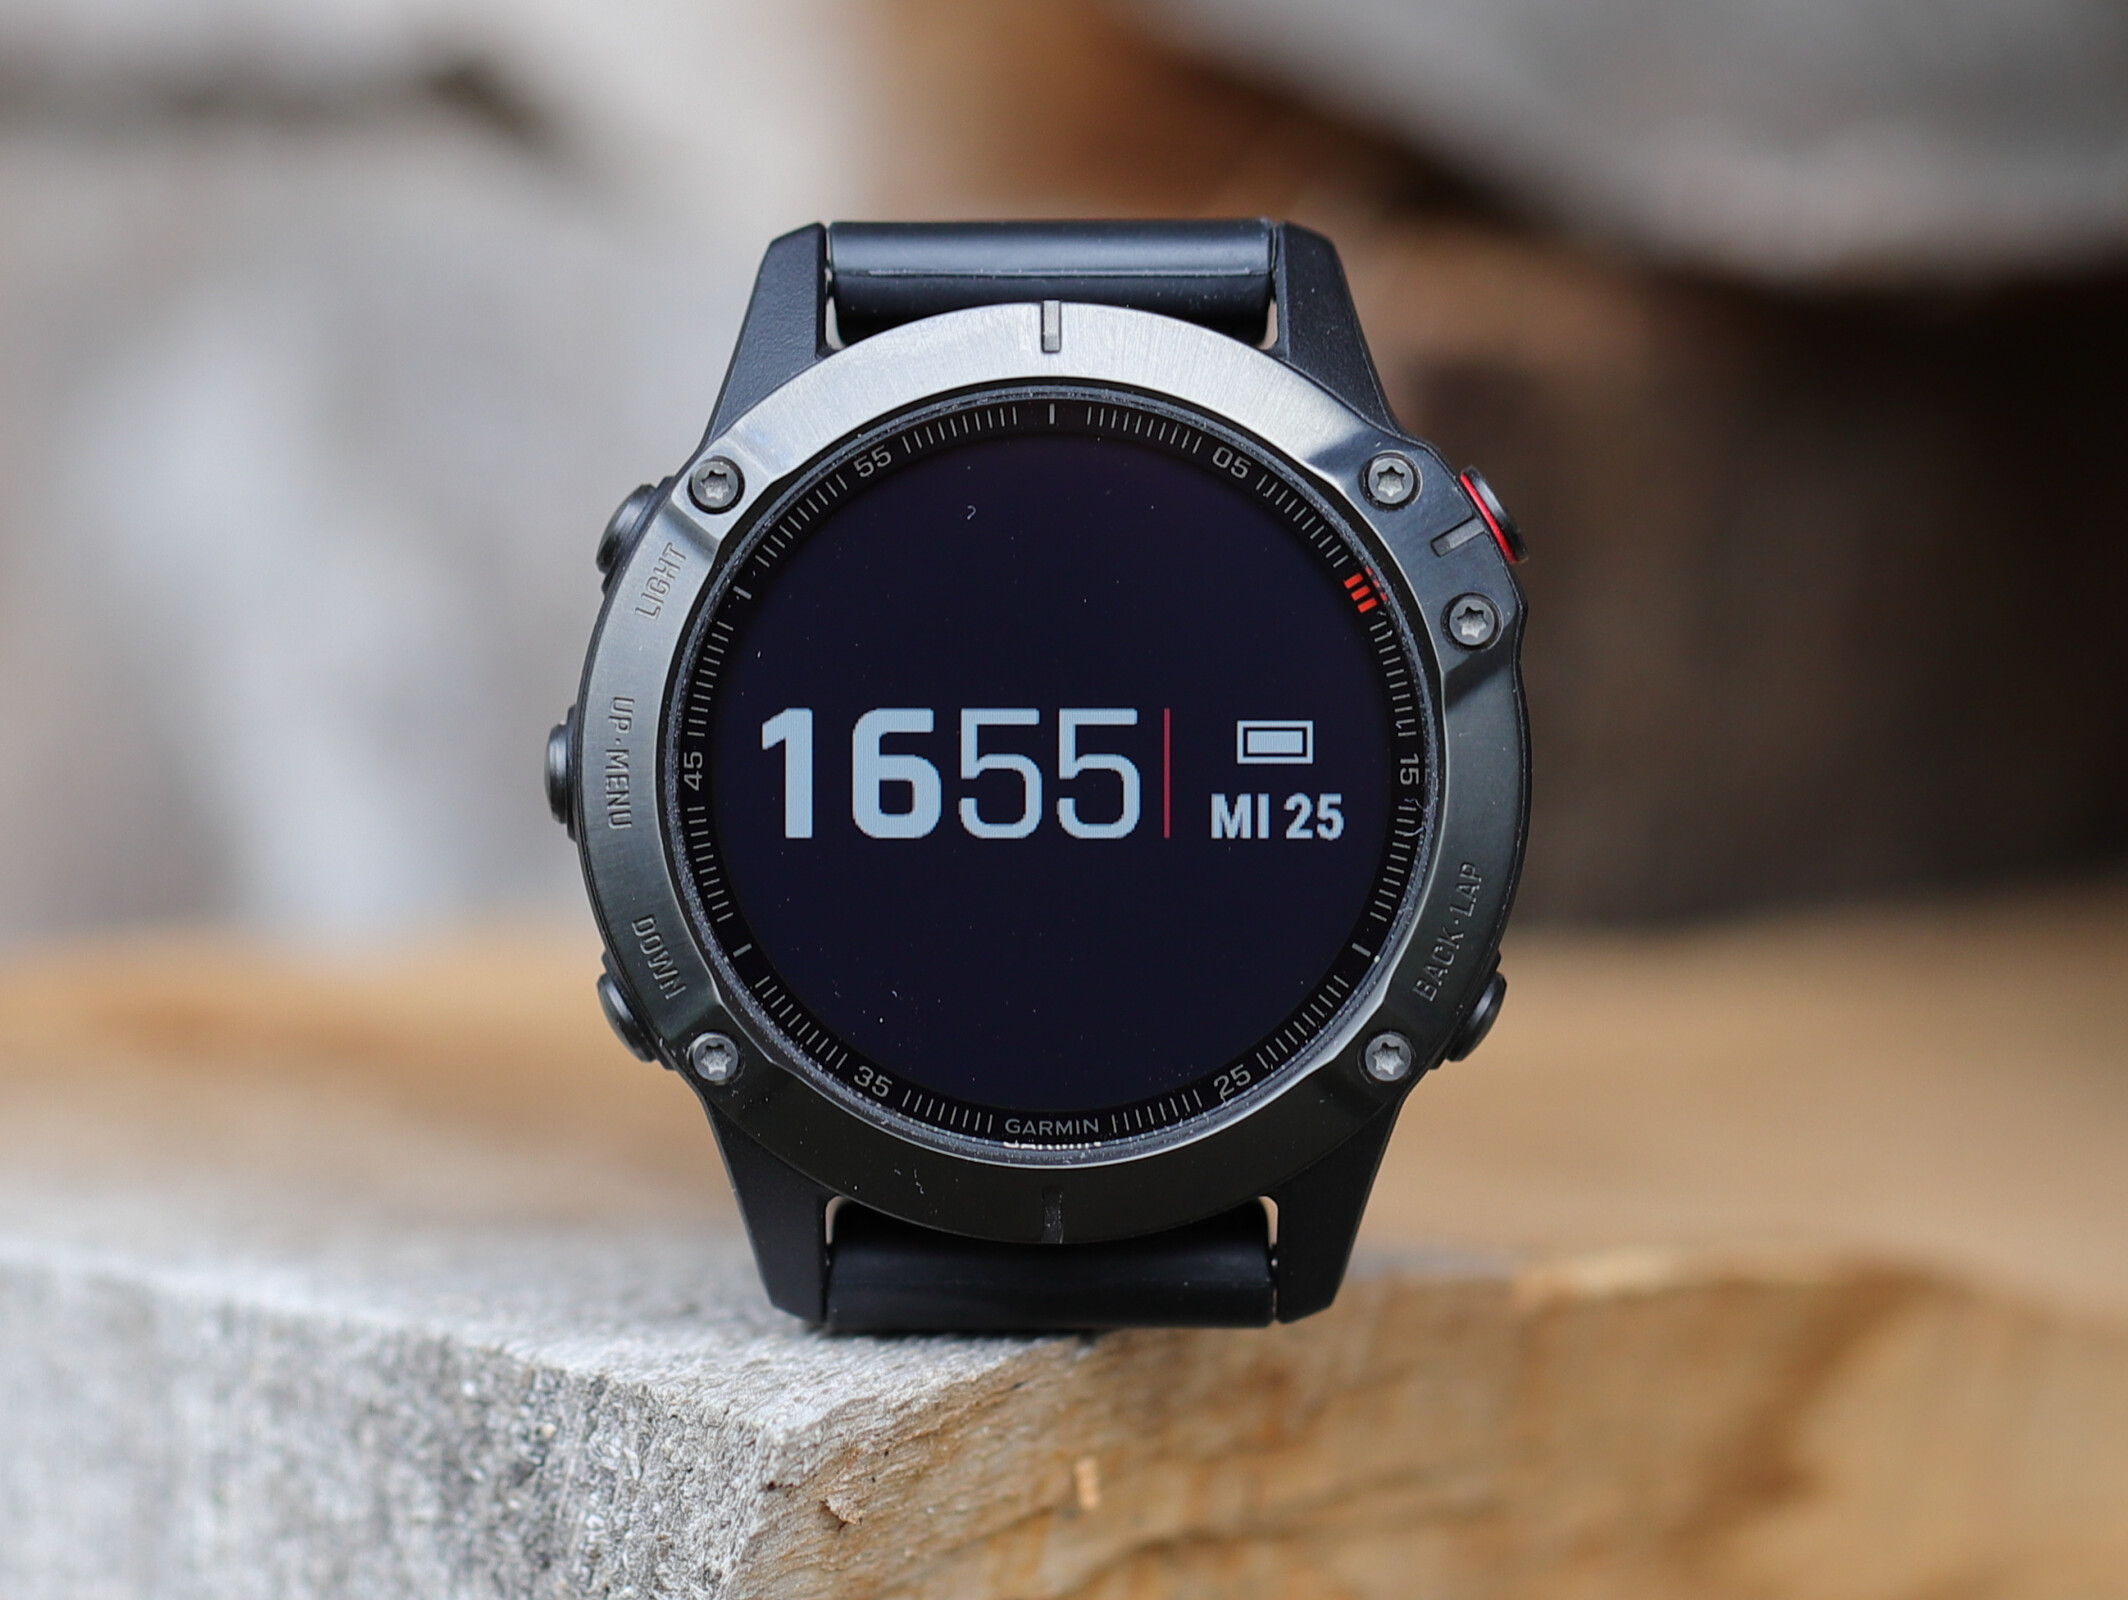 Garmin 6, Enduro, Tactix and MARQ series smartwatches gain bug fixes, new features improvements with Alpha version NotebookCheck.net News